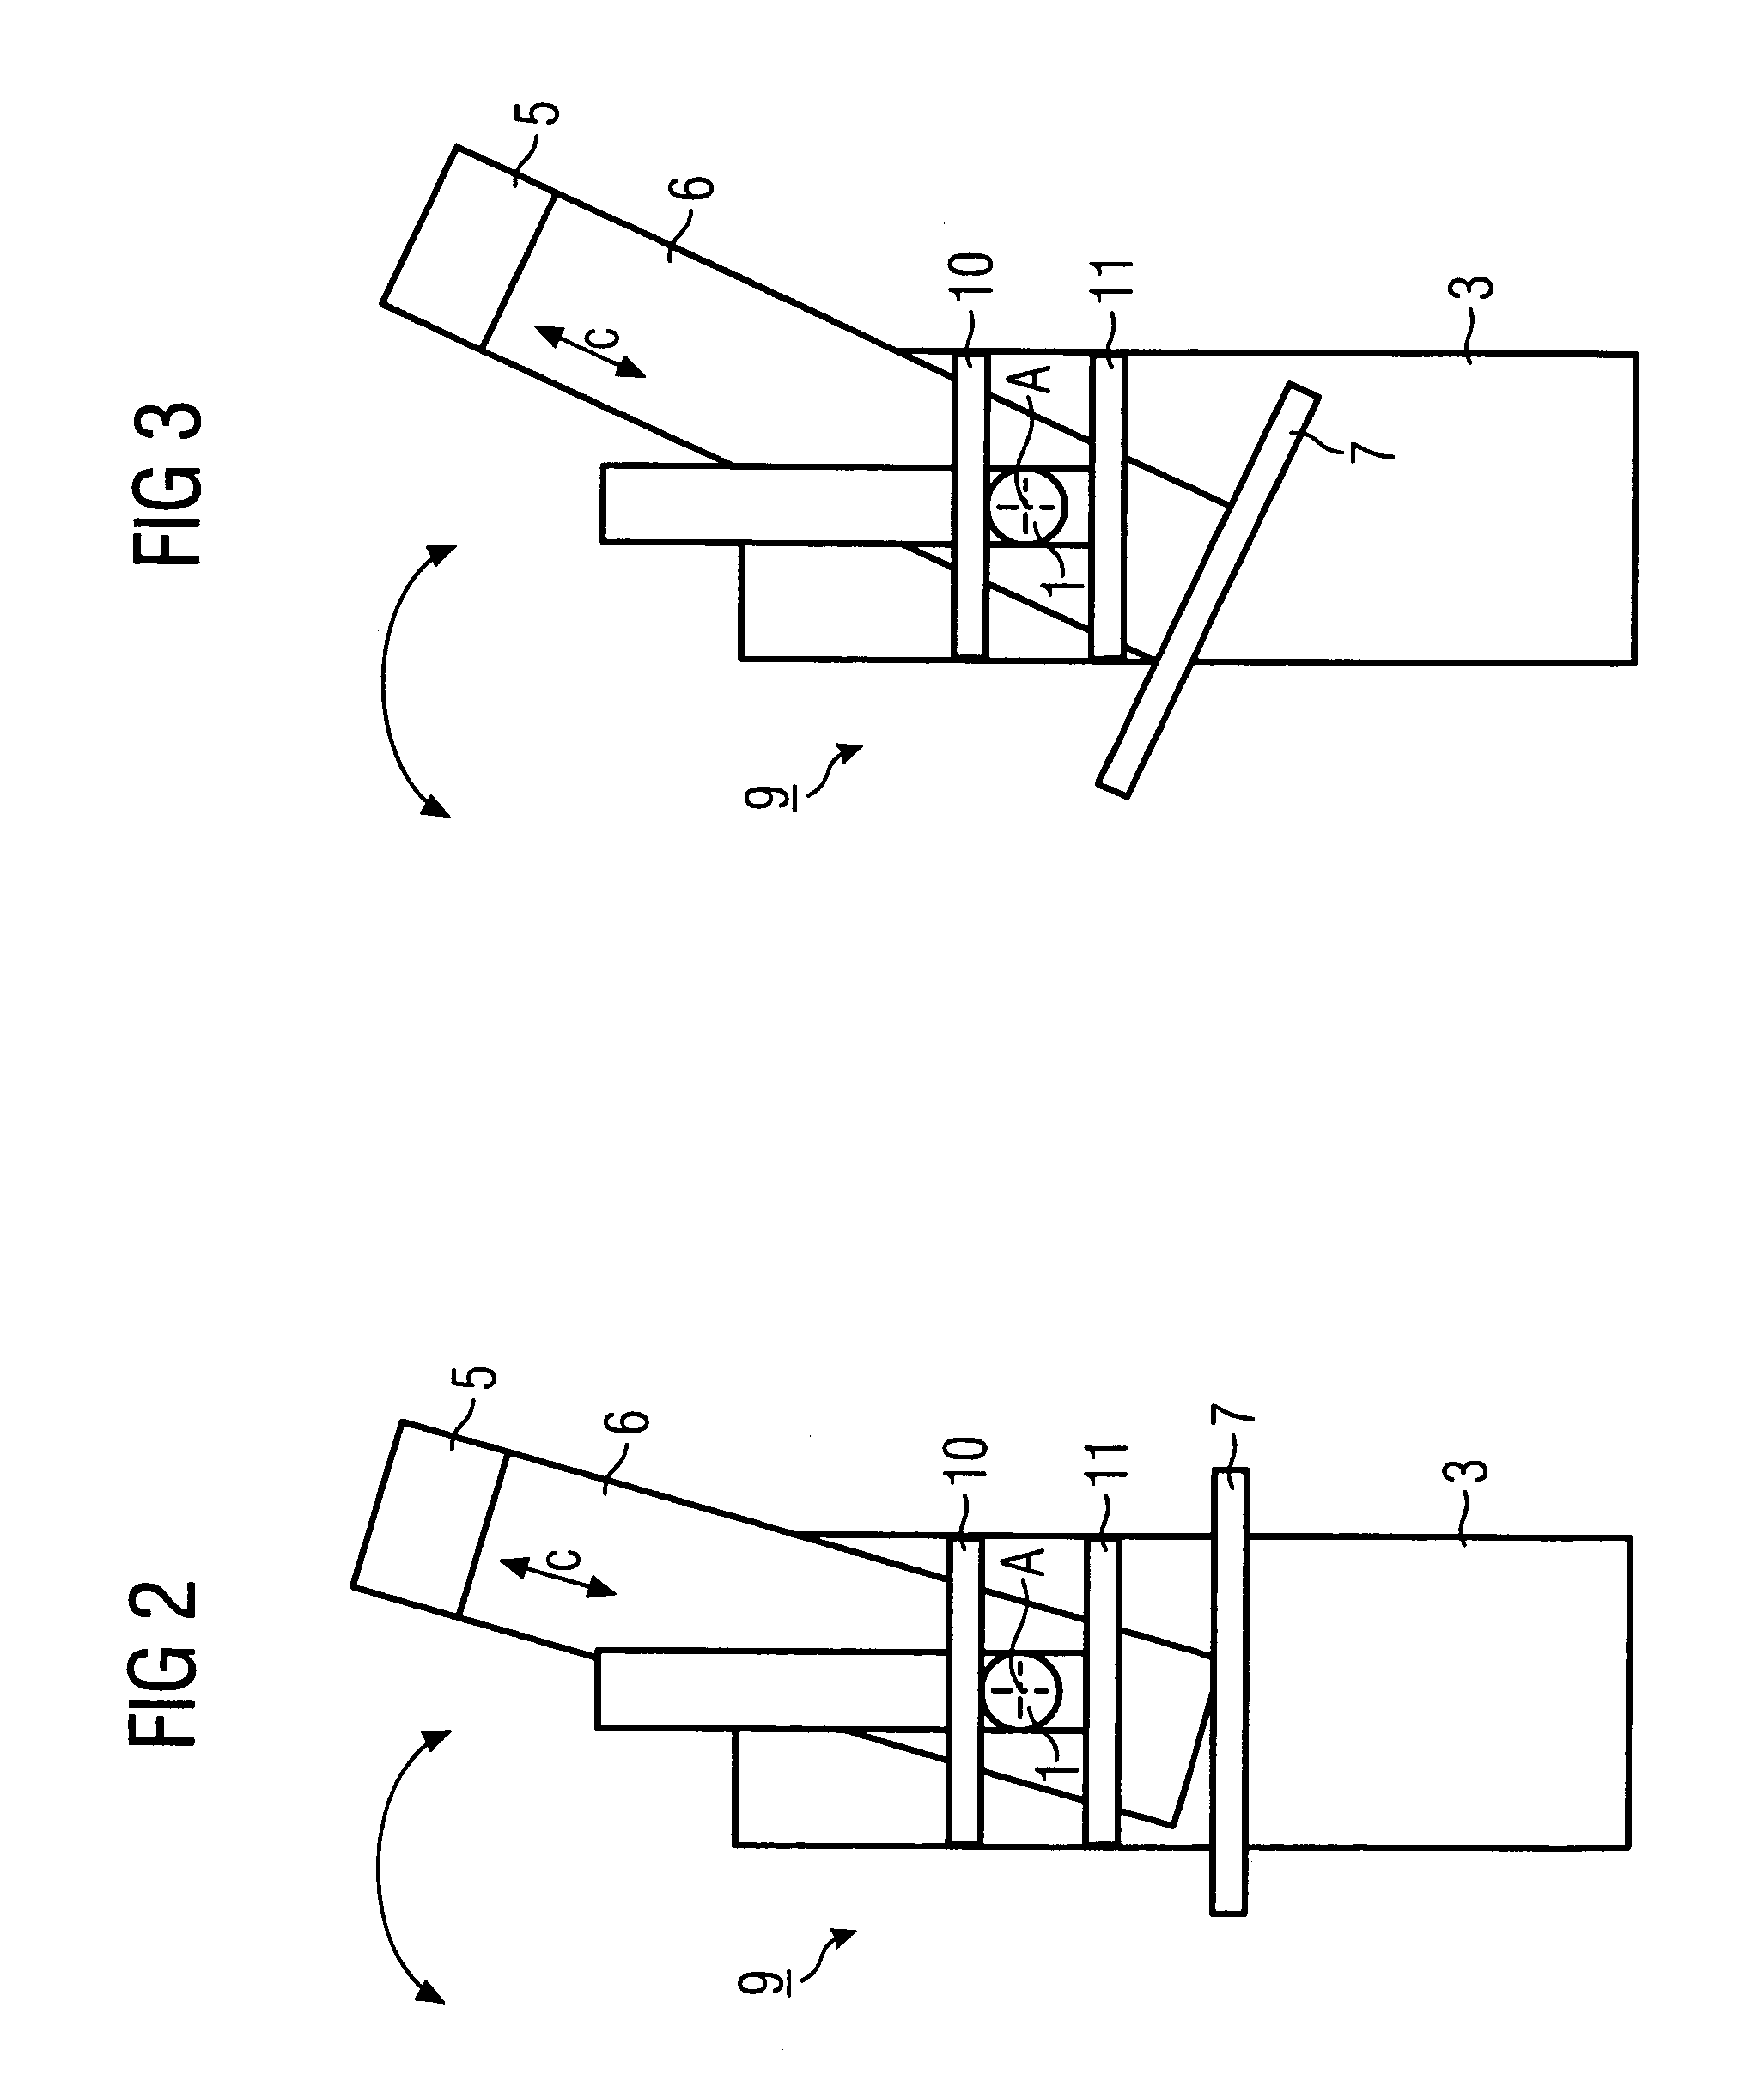 X-ray diagnostic apparatus for mammography examinations